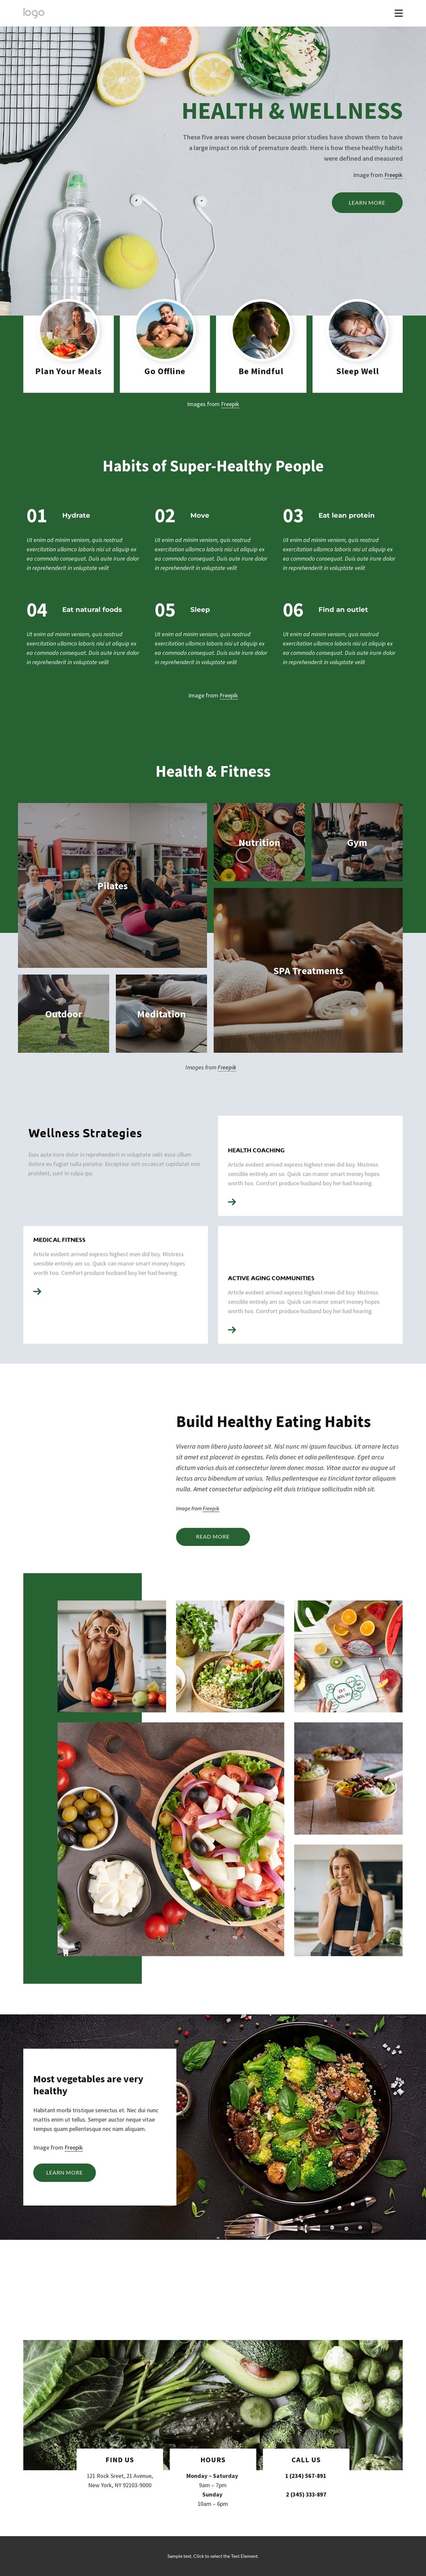 Health and wellness center Template